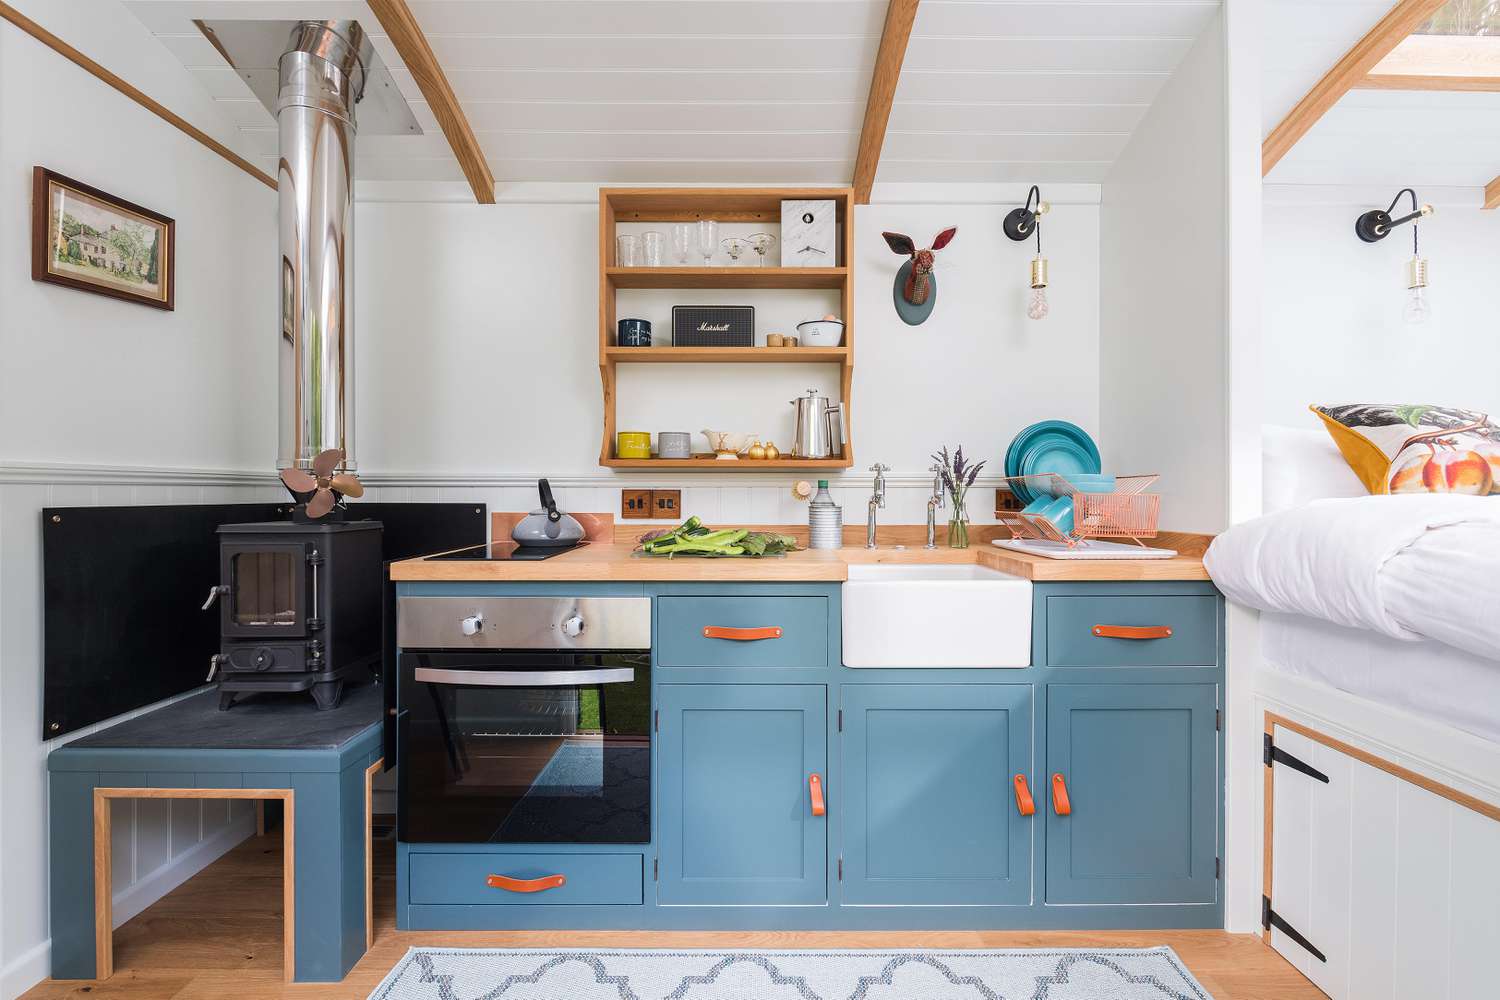 Tiny house kitchen with bright blue cabinets and leather hardware